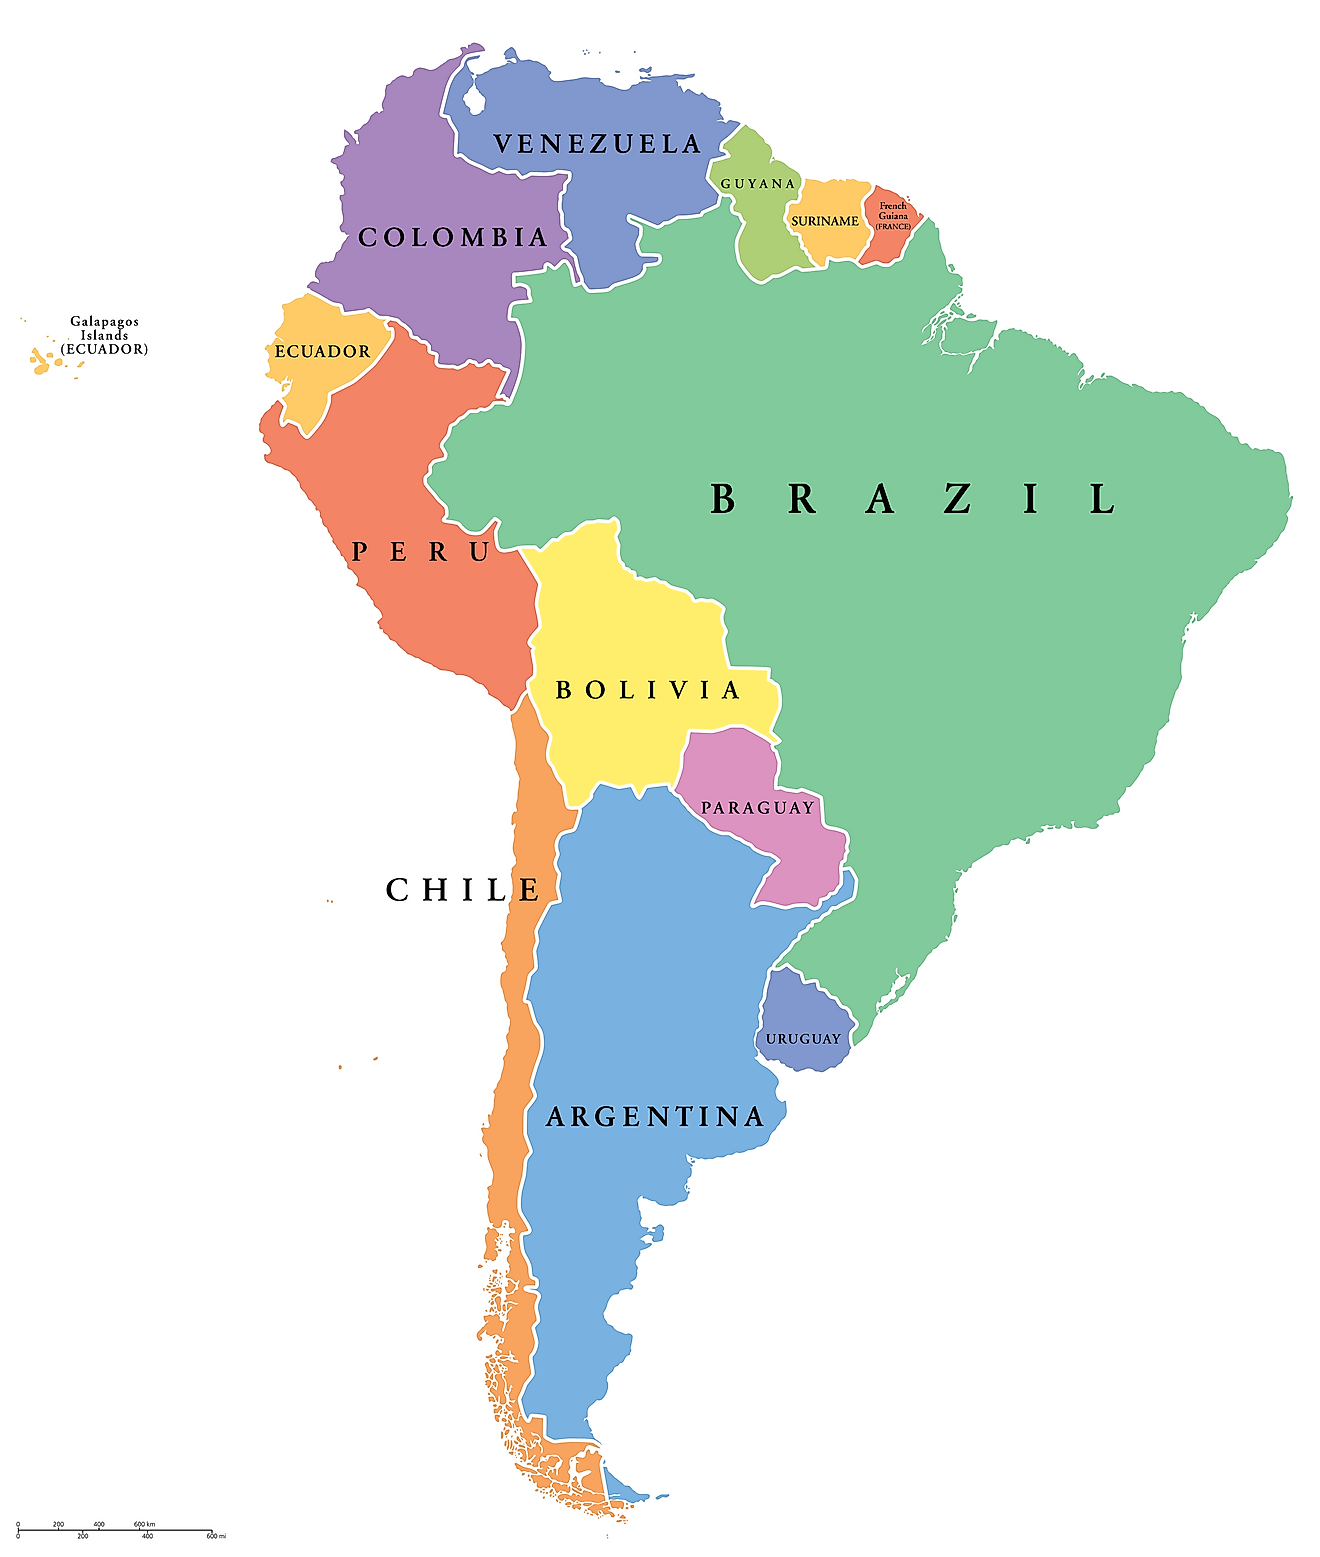 A political map displaying South American countries